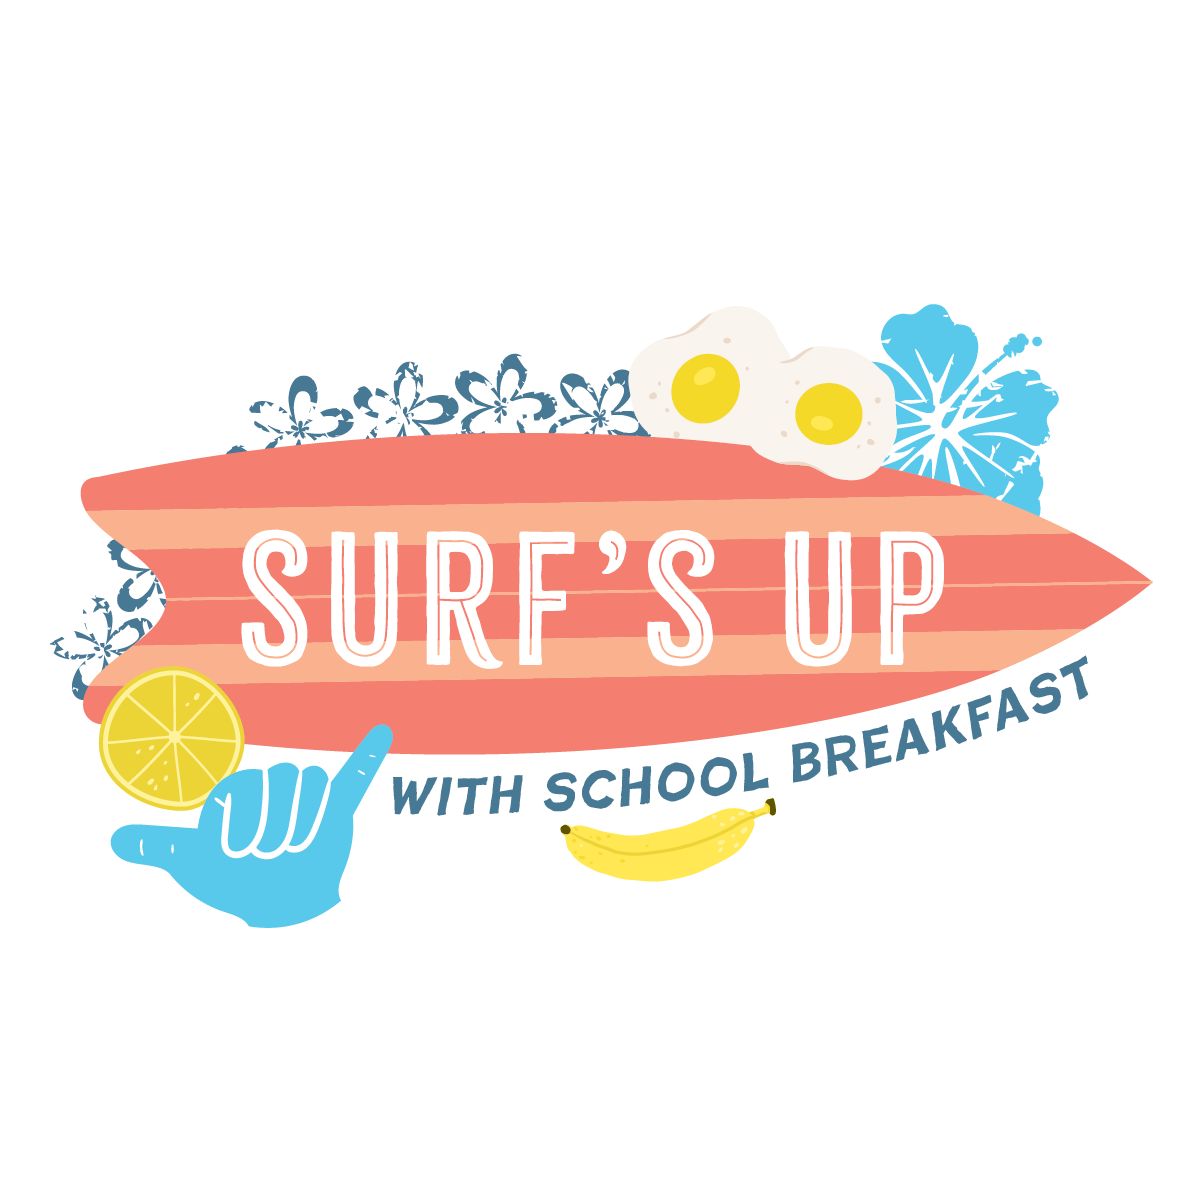 Surf's Up with School Breakfast Image